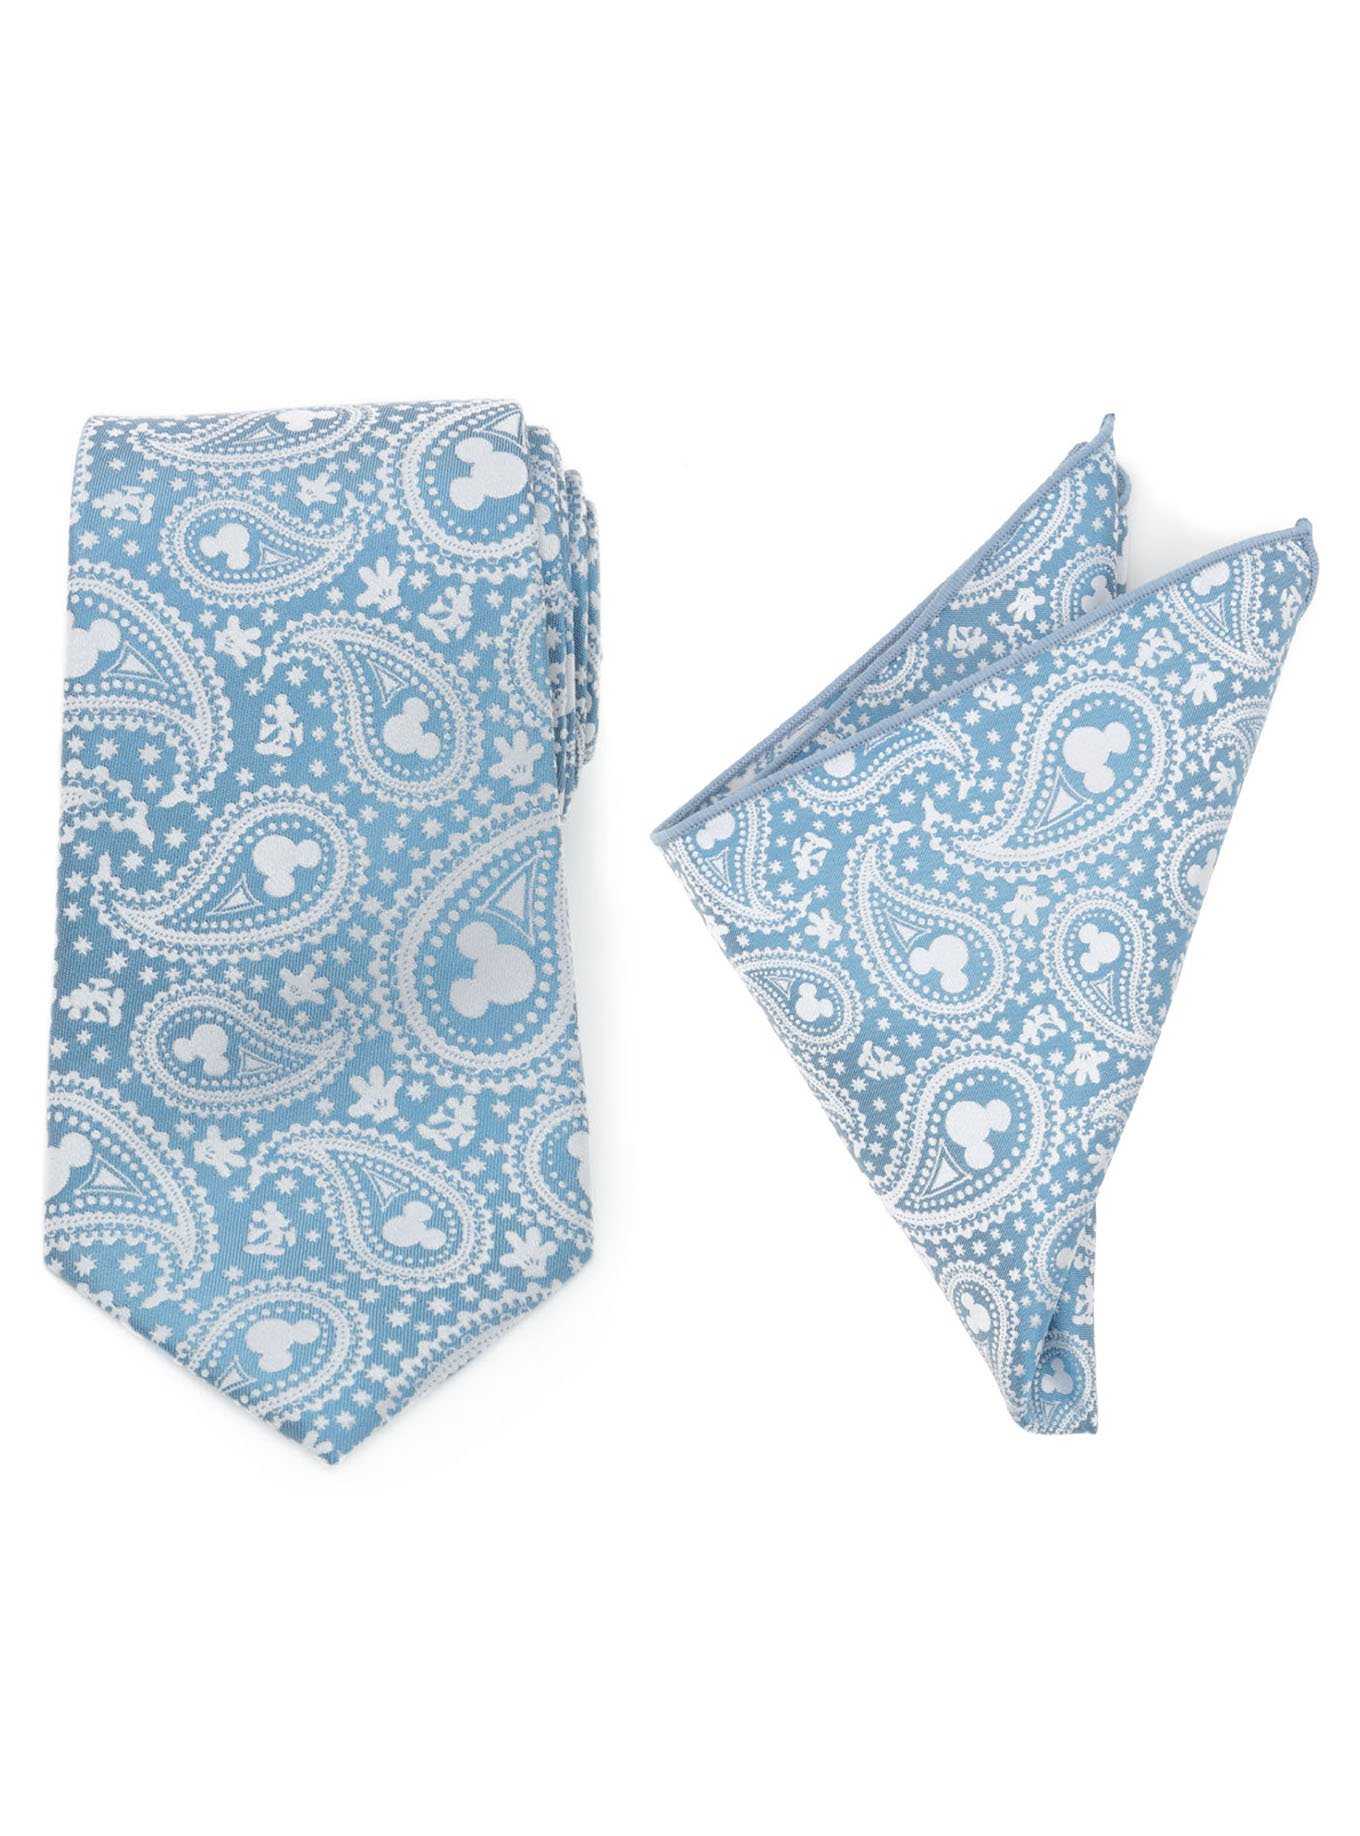 Disney Mickey Mouse Teal Paisley Necktie and Pocket Square Set, , hi-res